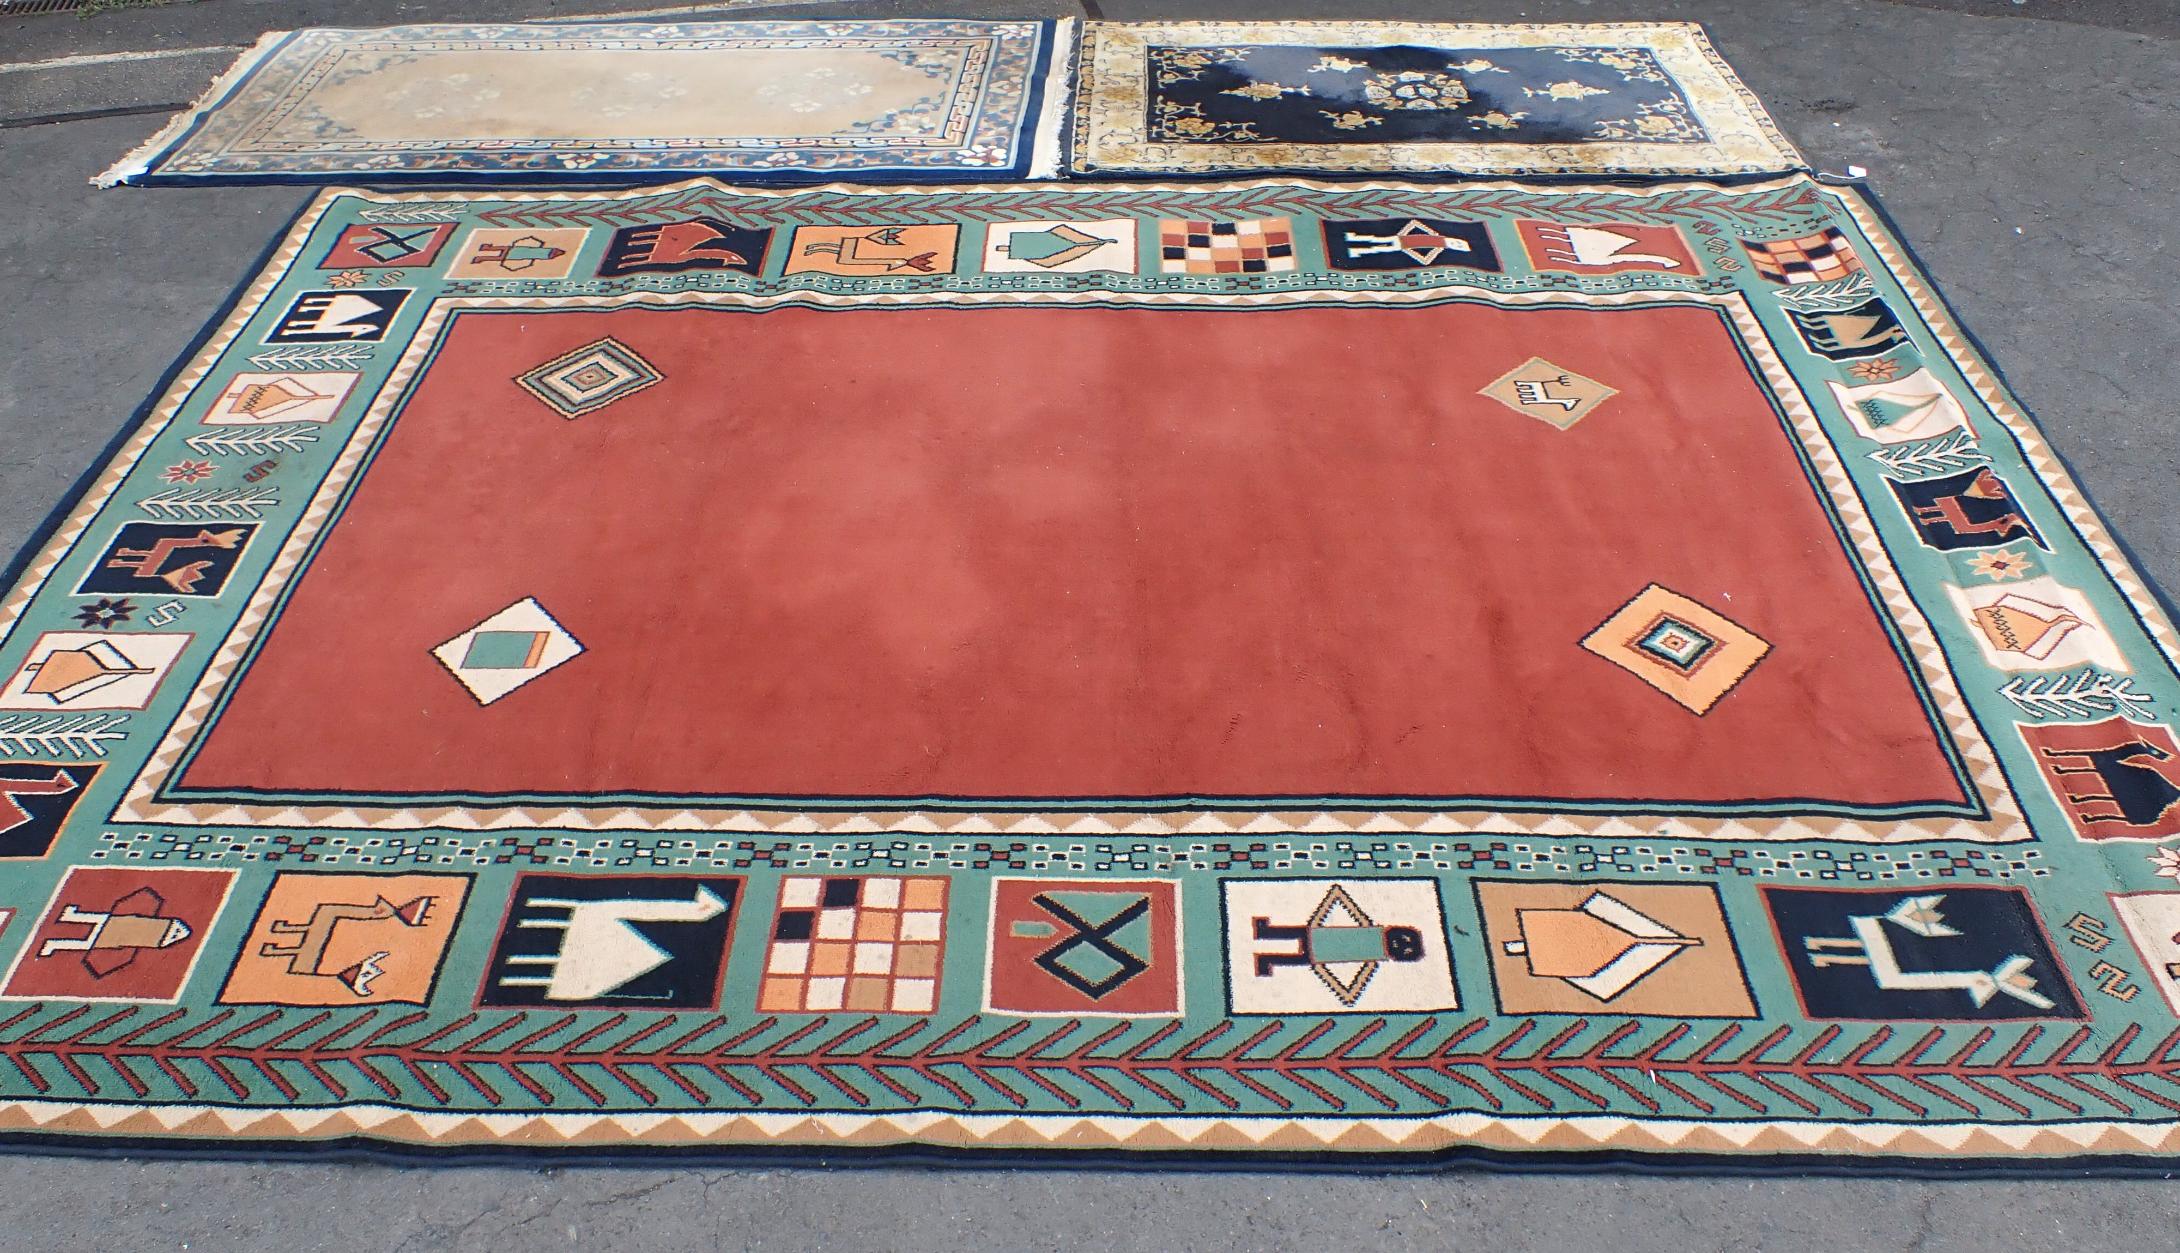 TWO CHINESE RUGS, AND A LARGER RUG